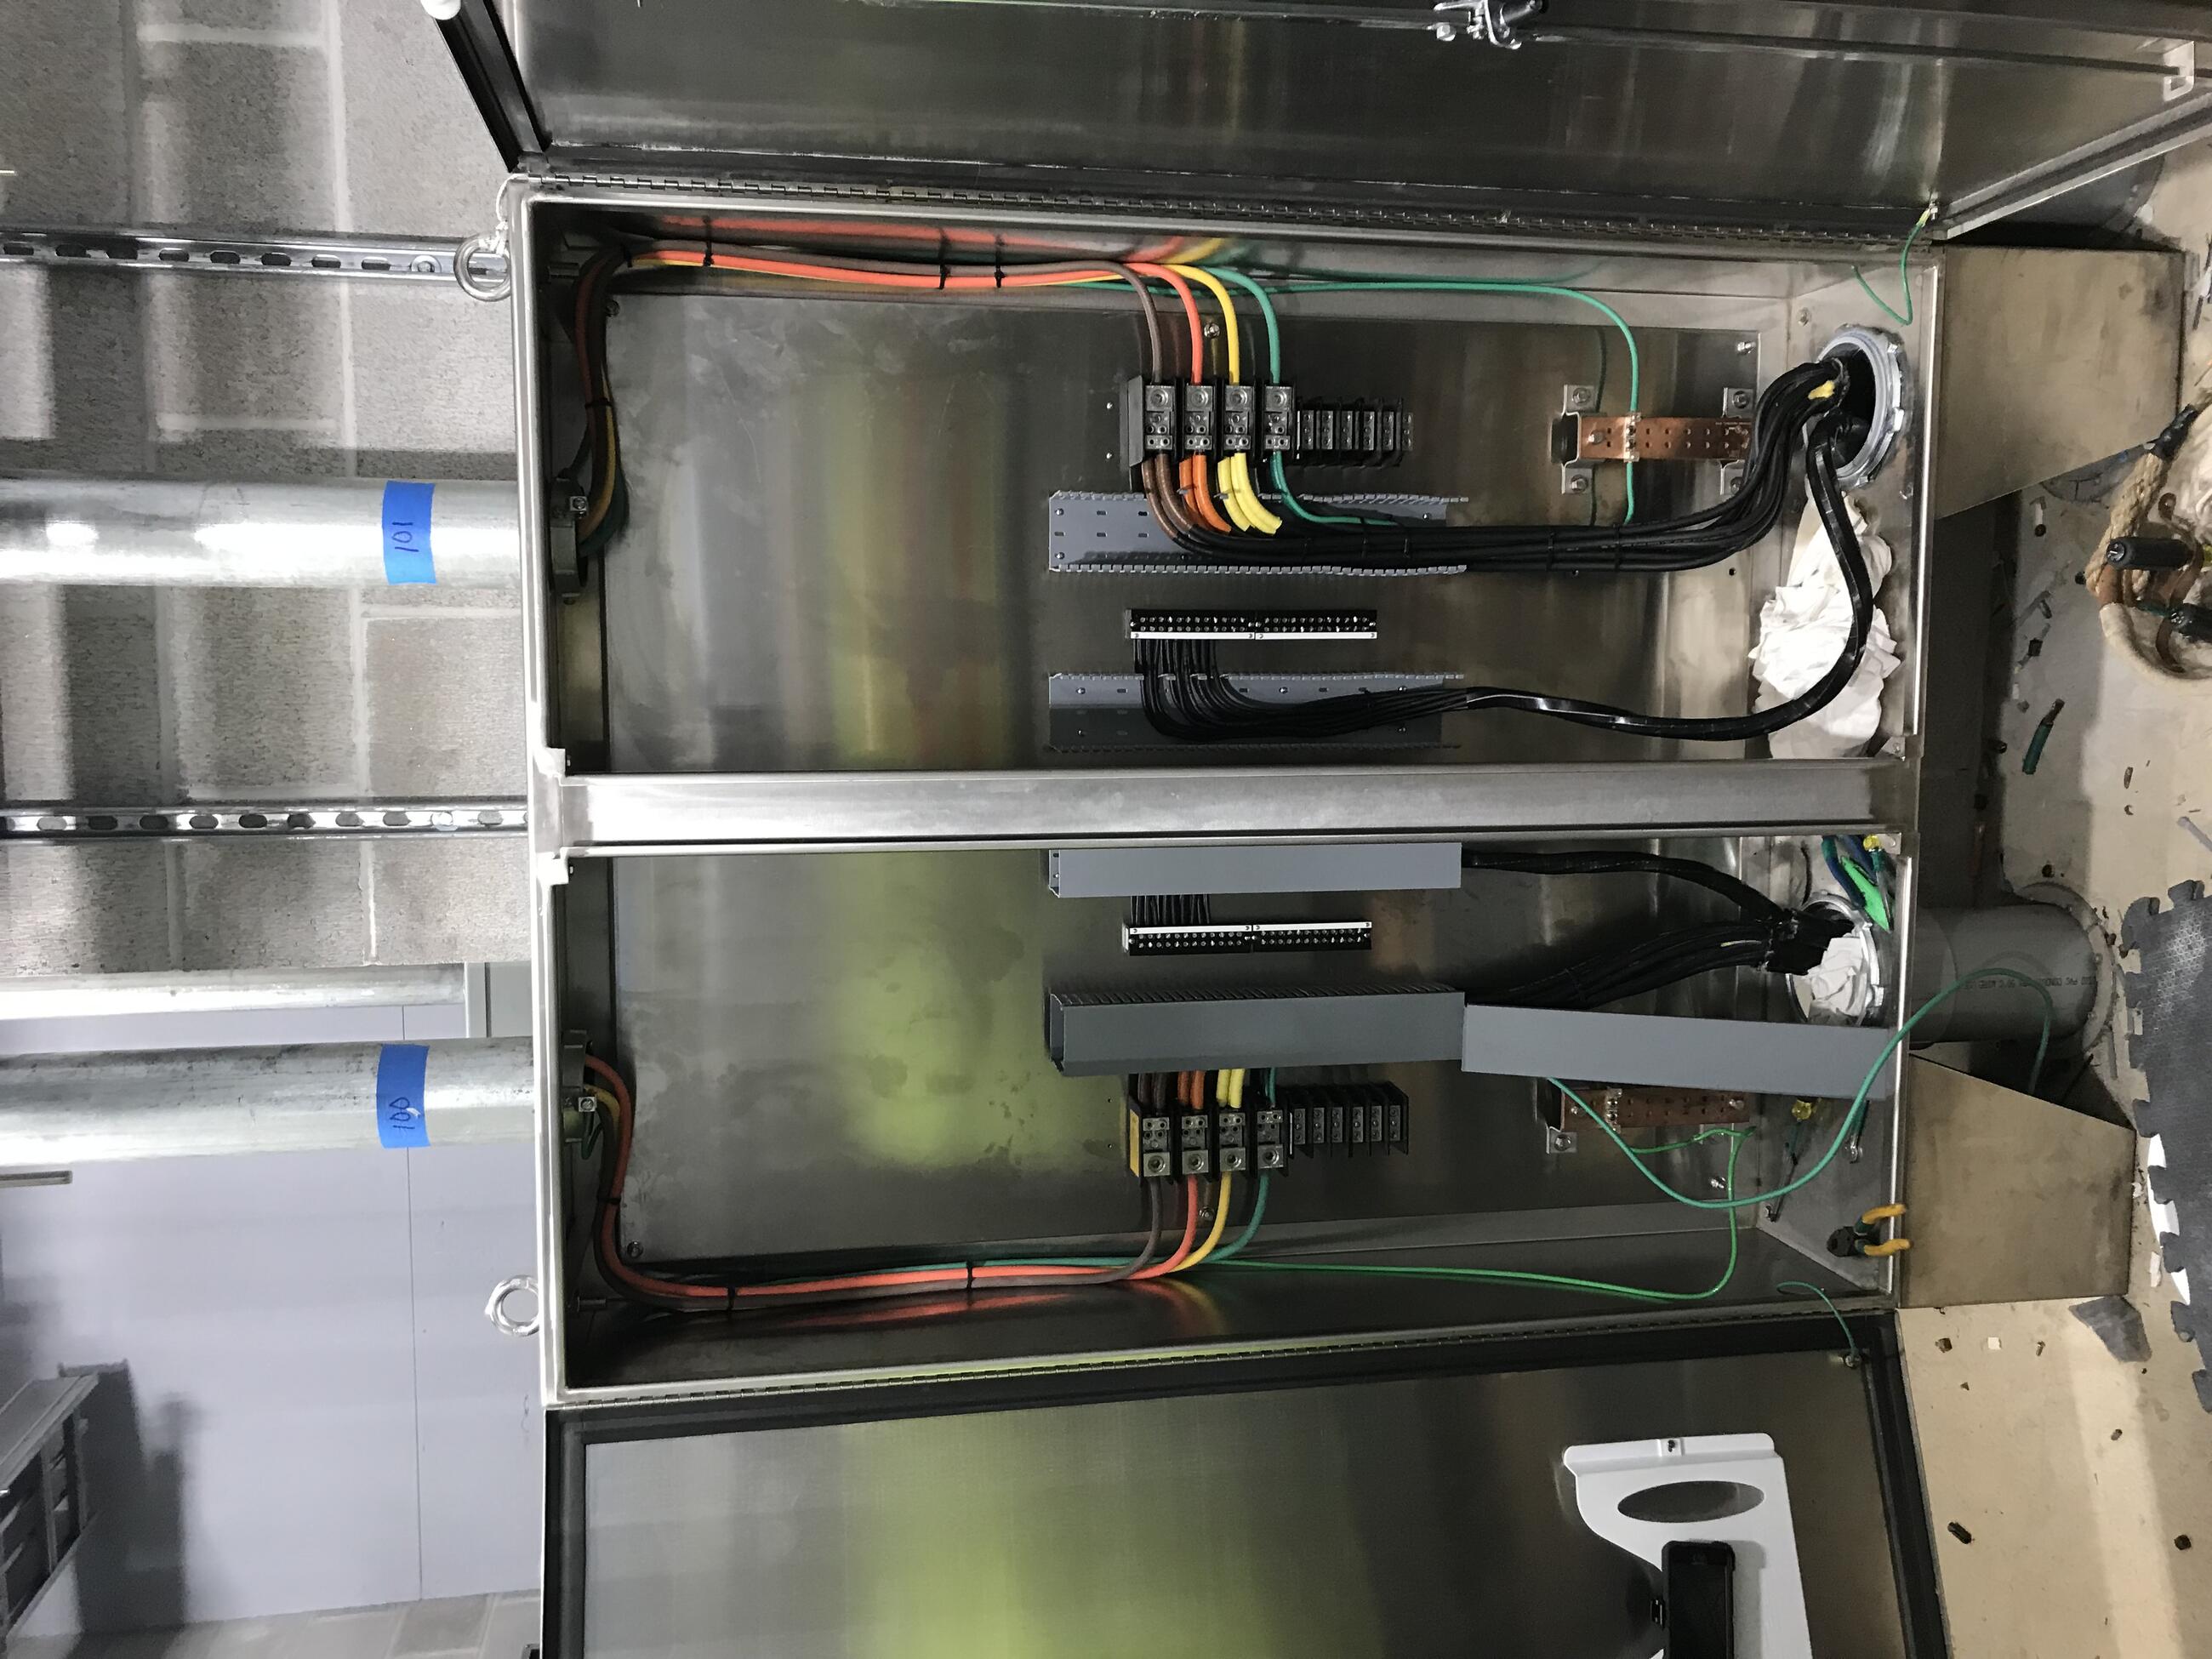 A steel cabinet with two vertical bays has both doors open to reveal thin green, yellow, orange, and brown cables, as well as several thicker black cables. The cabinet is backed by cinderblock walls and is surmounted by two metal ducts into which the colored cables are threaded. 